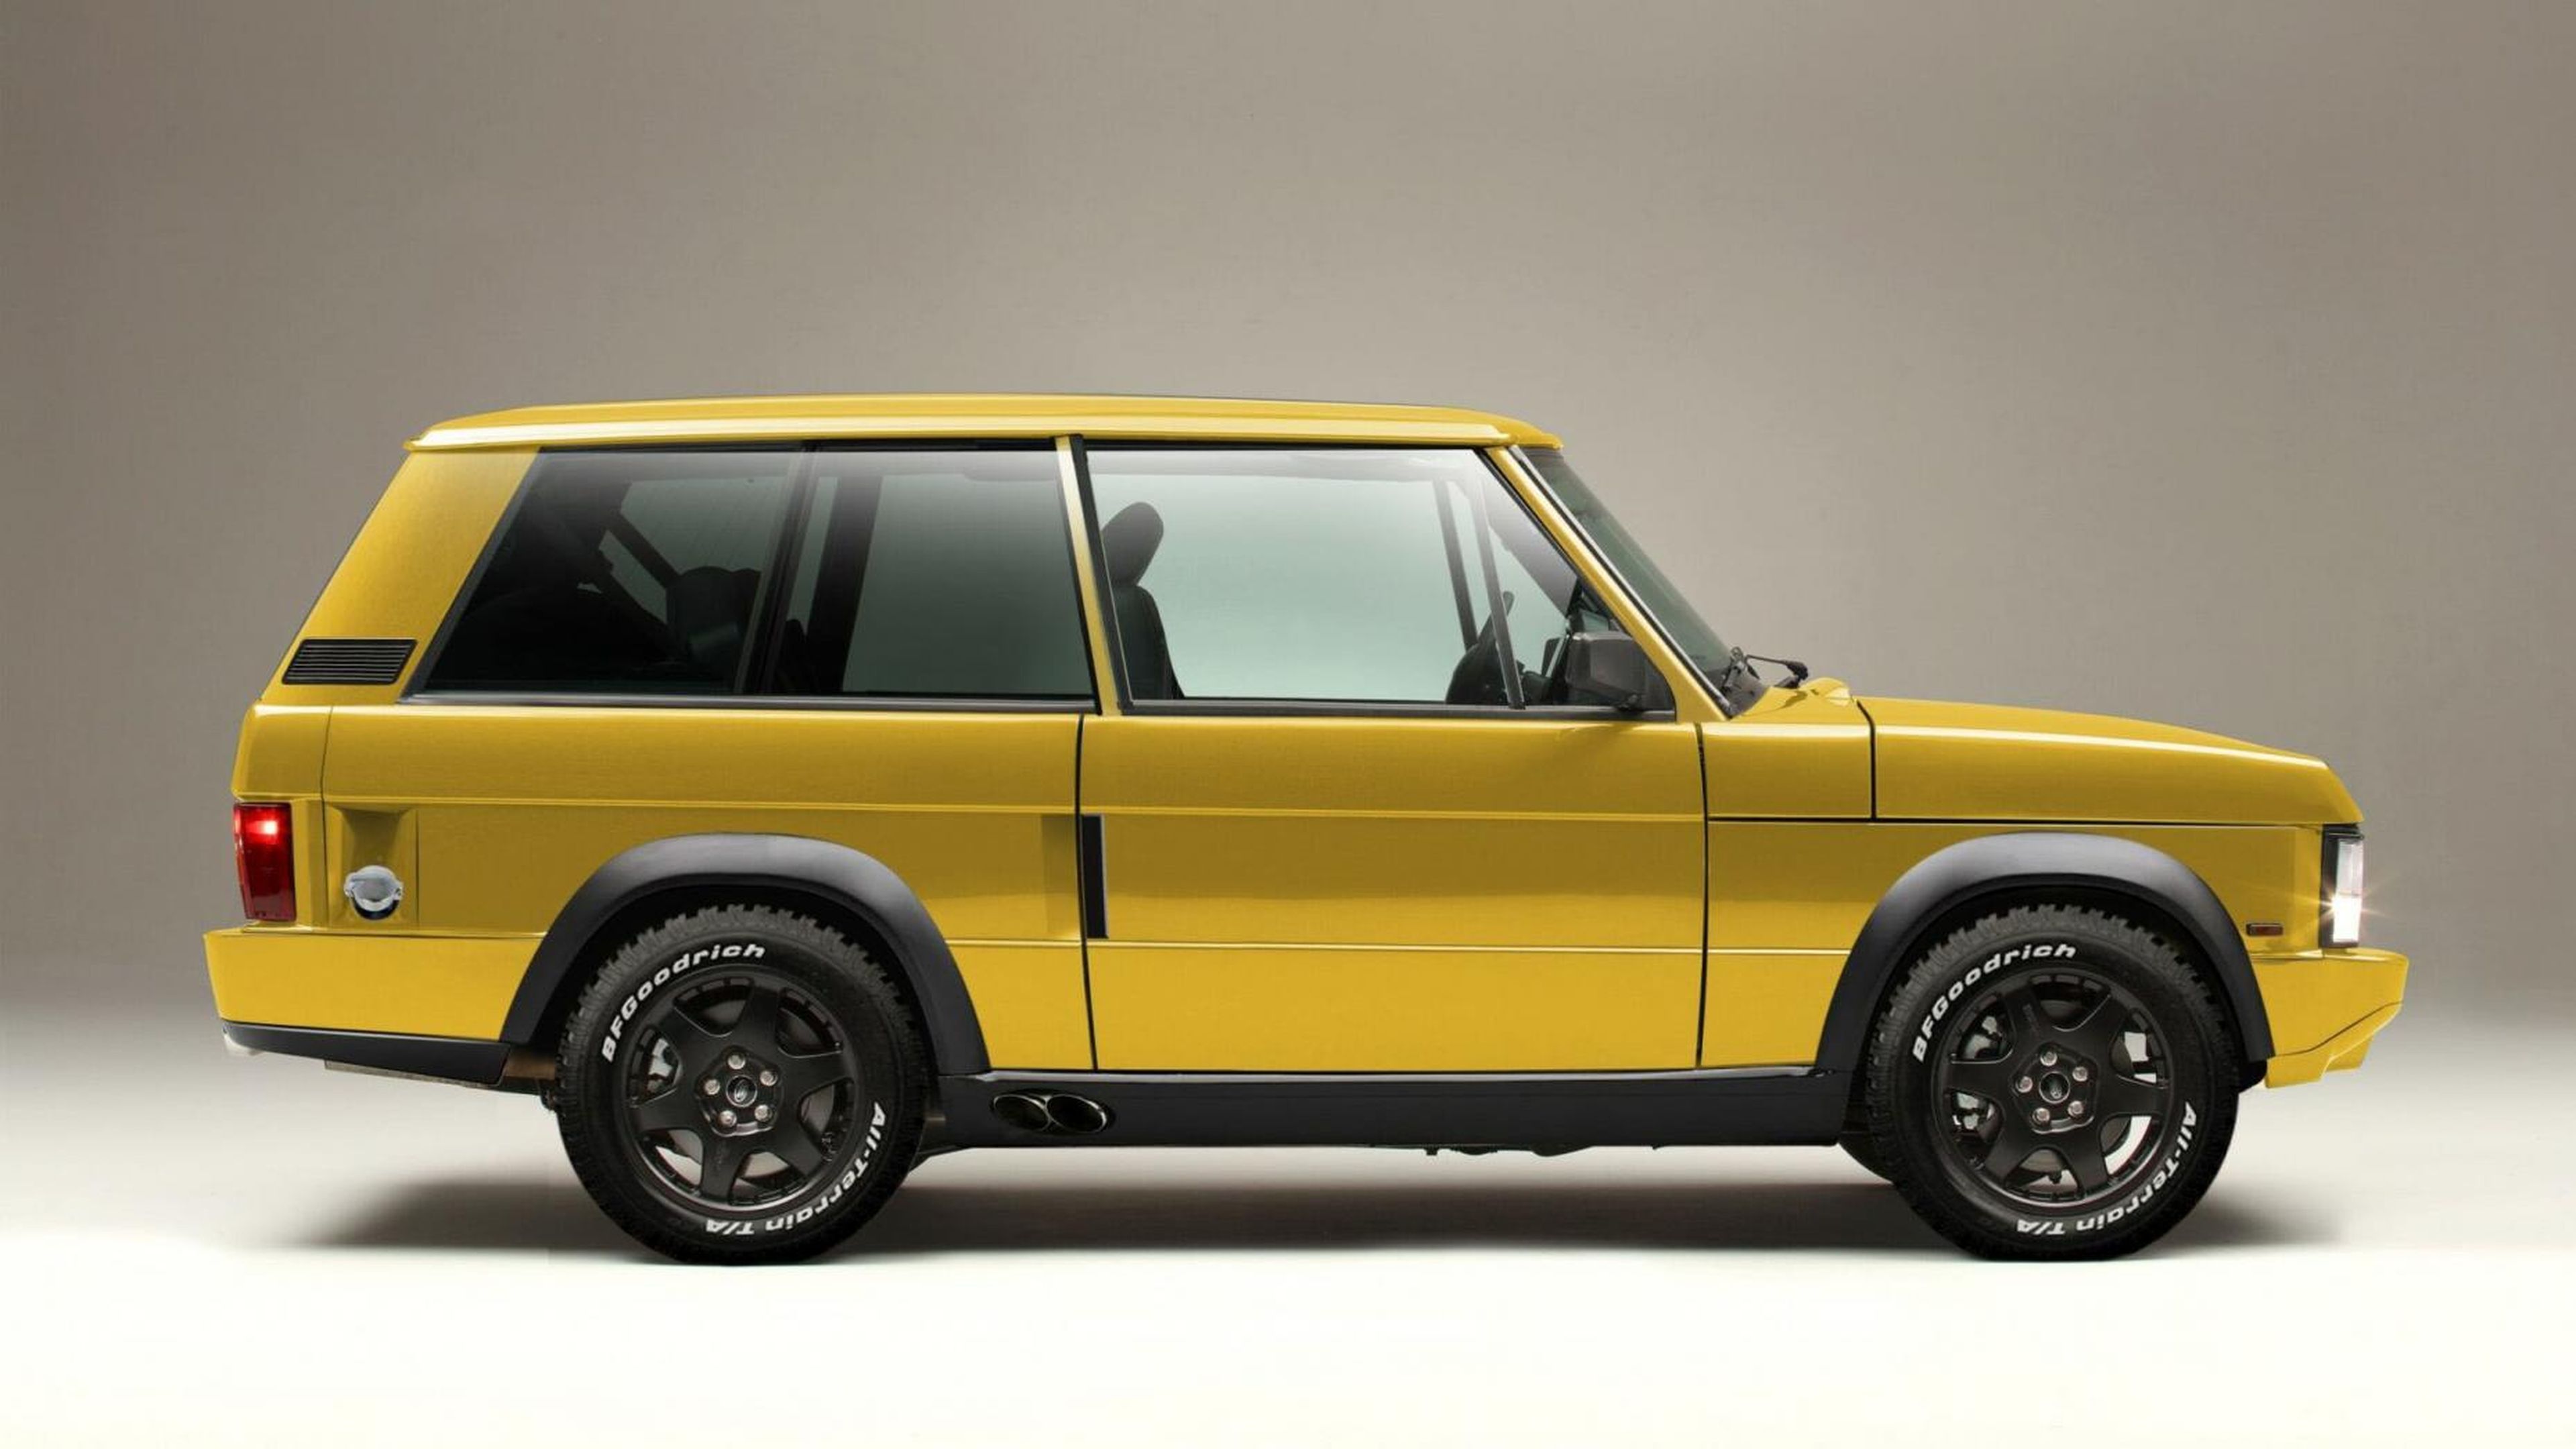 Chieftain Extreme Range Rover